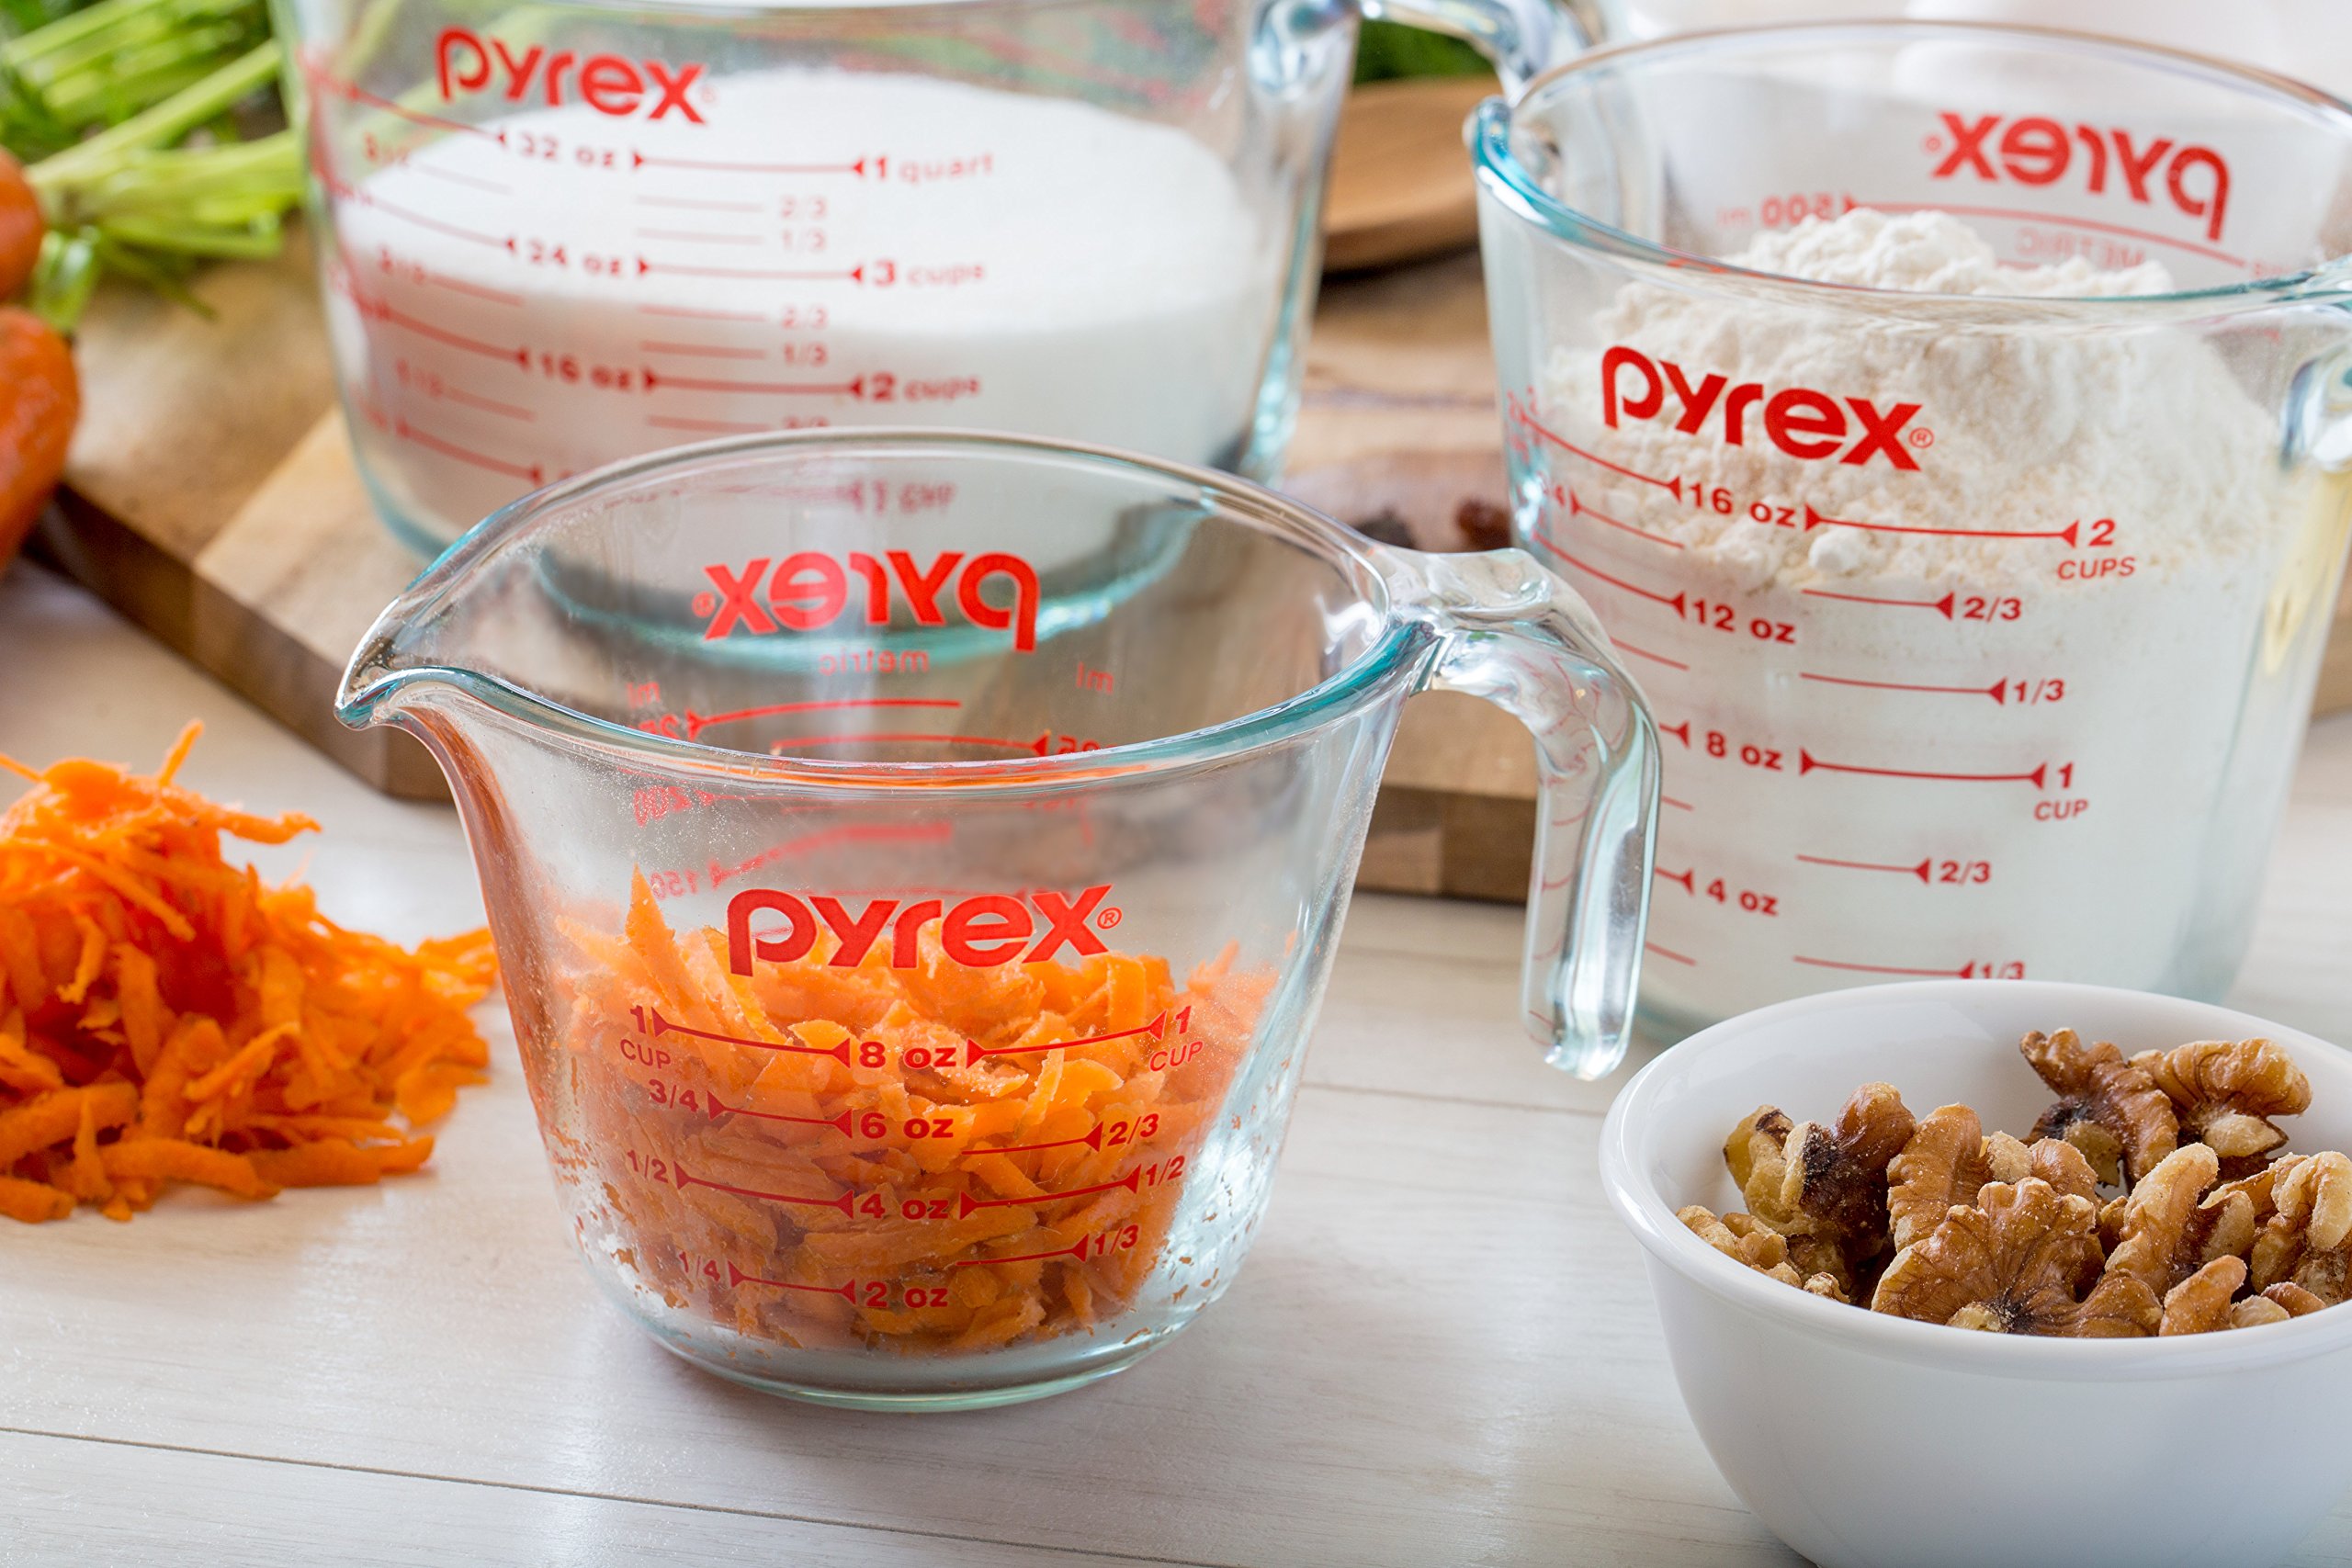 Pyrex Tempered Glass Liquid Measuring Cups Set, Includes 1-Cup, 2-Cup, 4-Cup, and 8-Cup, Dishwasher, Freezer, Microwave, and Preheated Oven Safe, Essential Kitchen Tools, 4 Piece